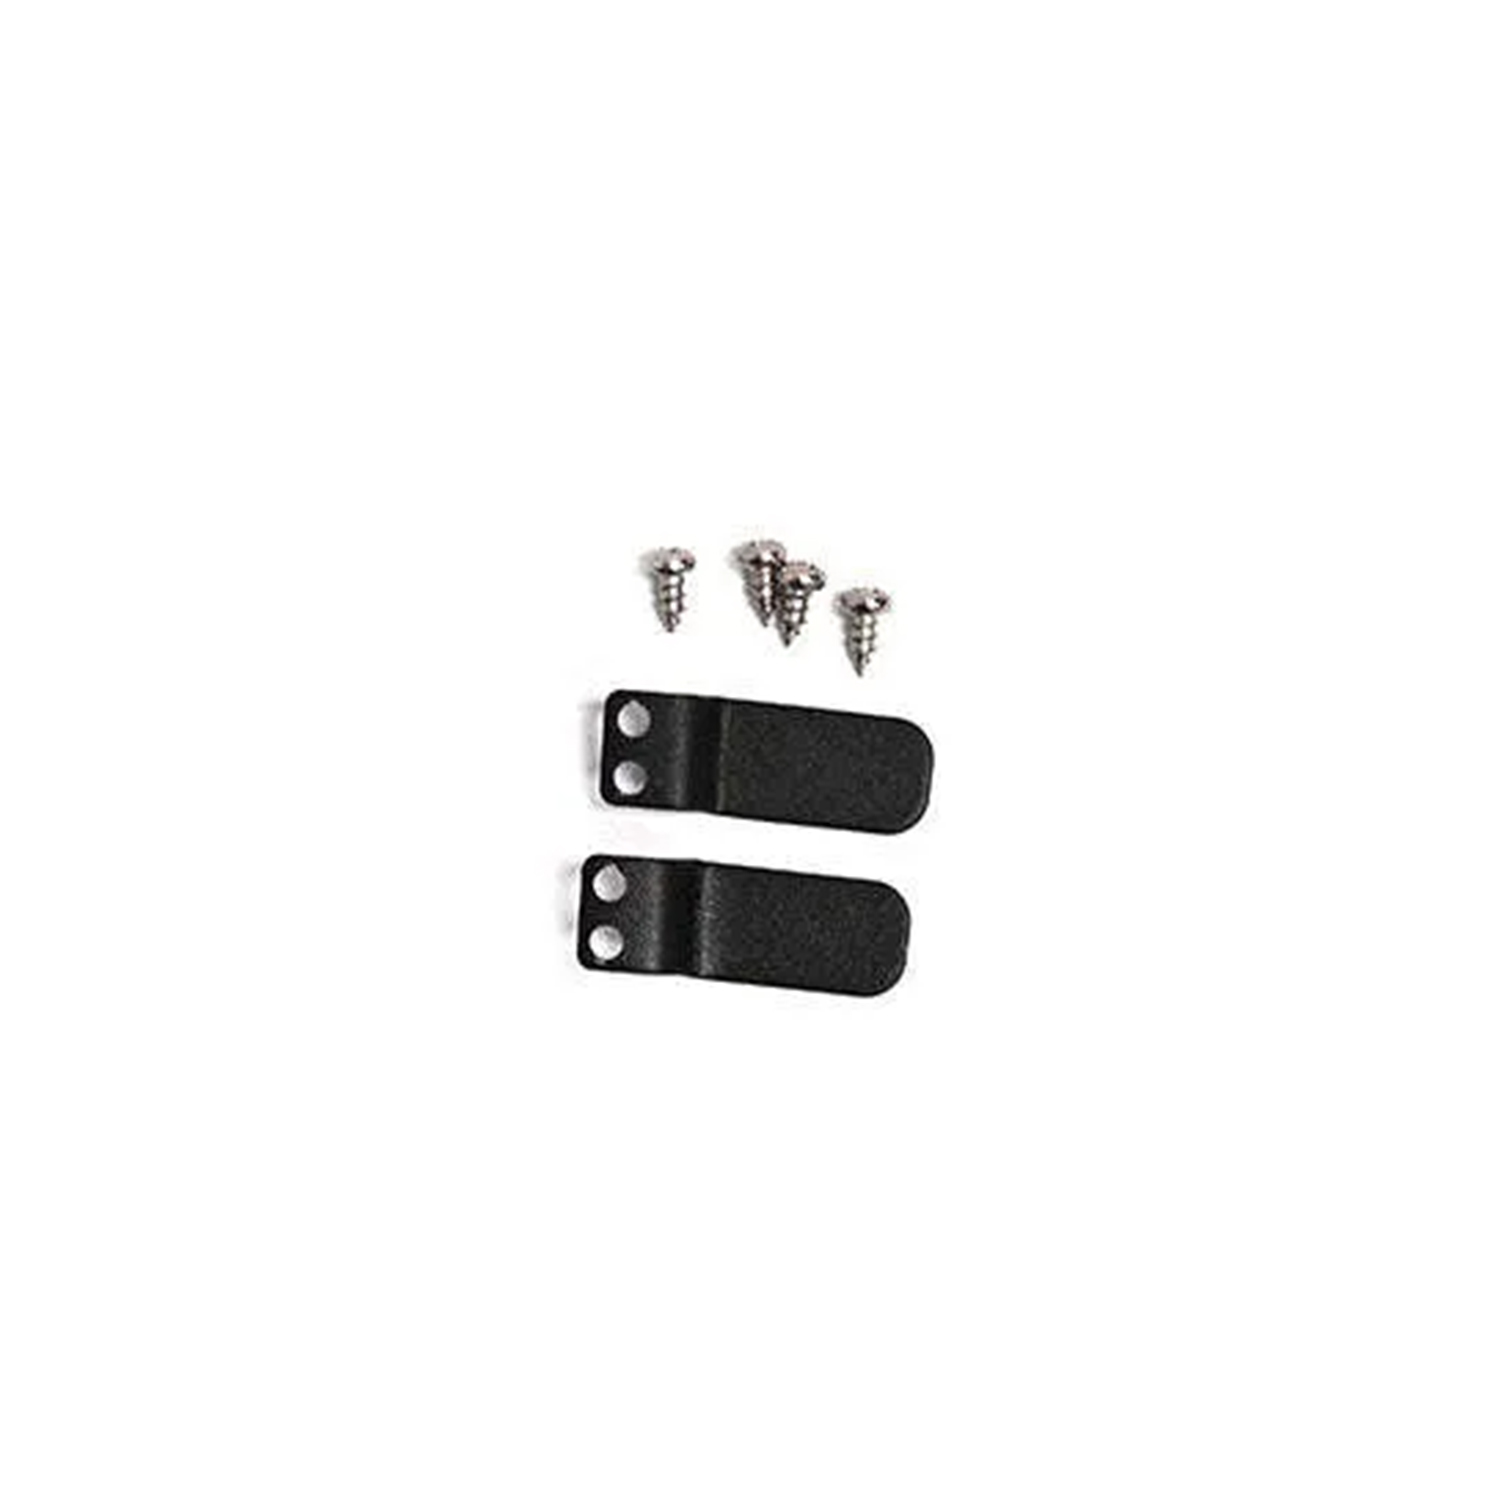 Grease Tray Bracket Kit for Masterbuilt Electric Smokers-YAOAWE